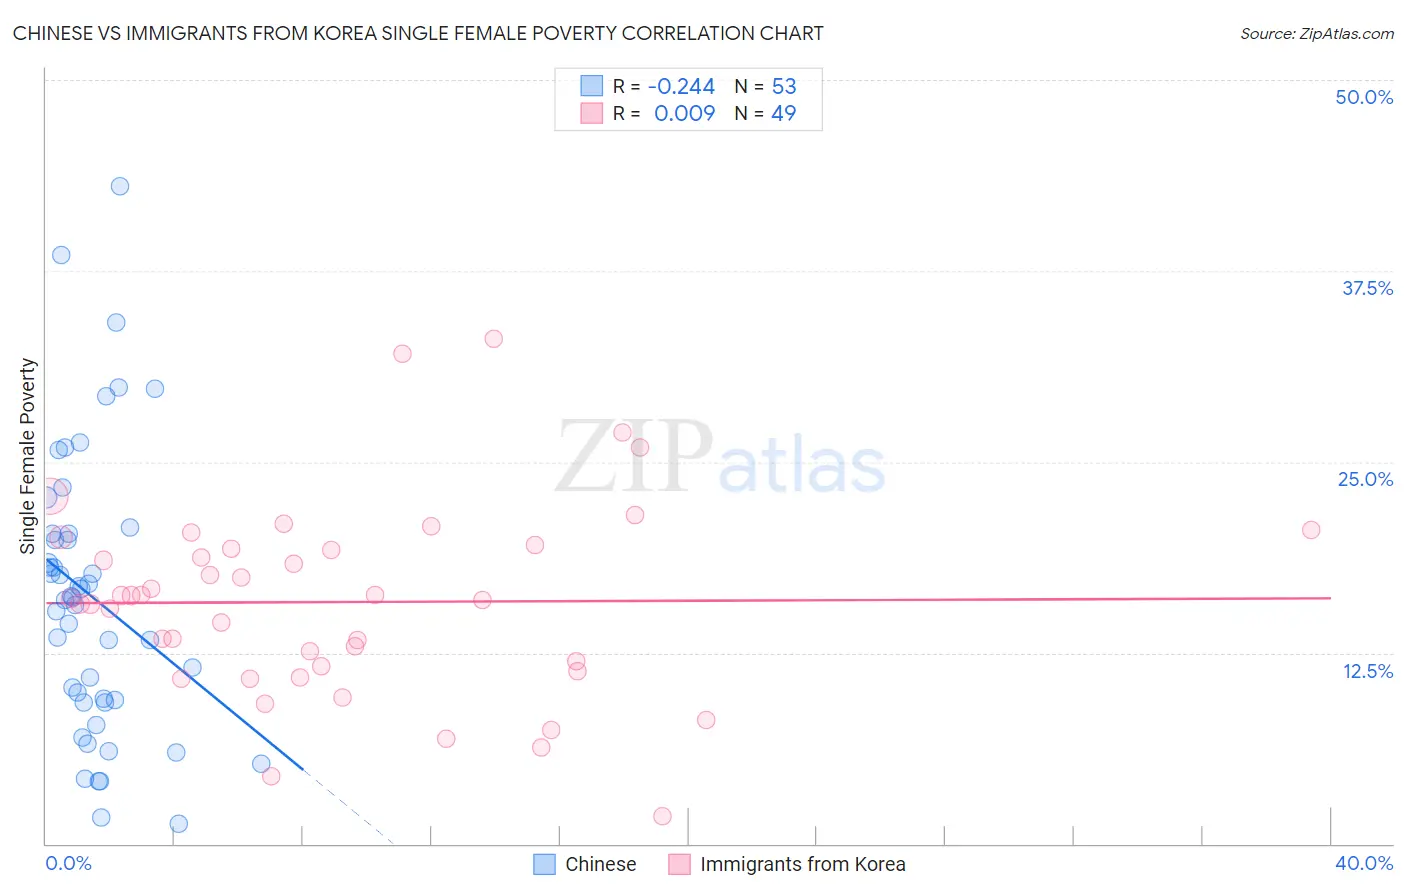 Chinese vs Immigrants from Korea Single Female Poverty